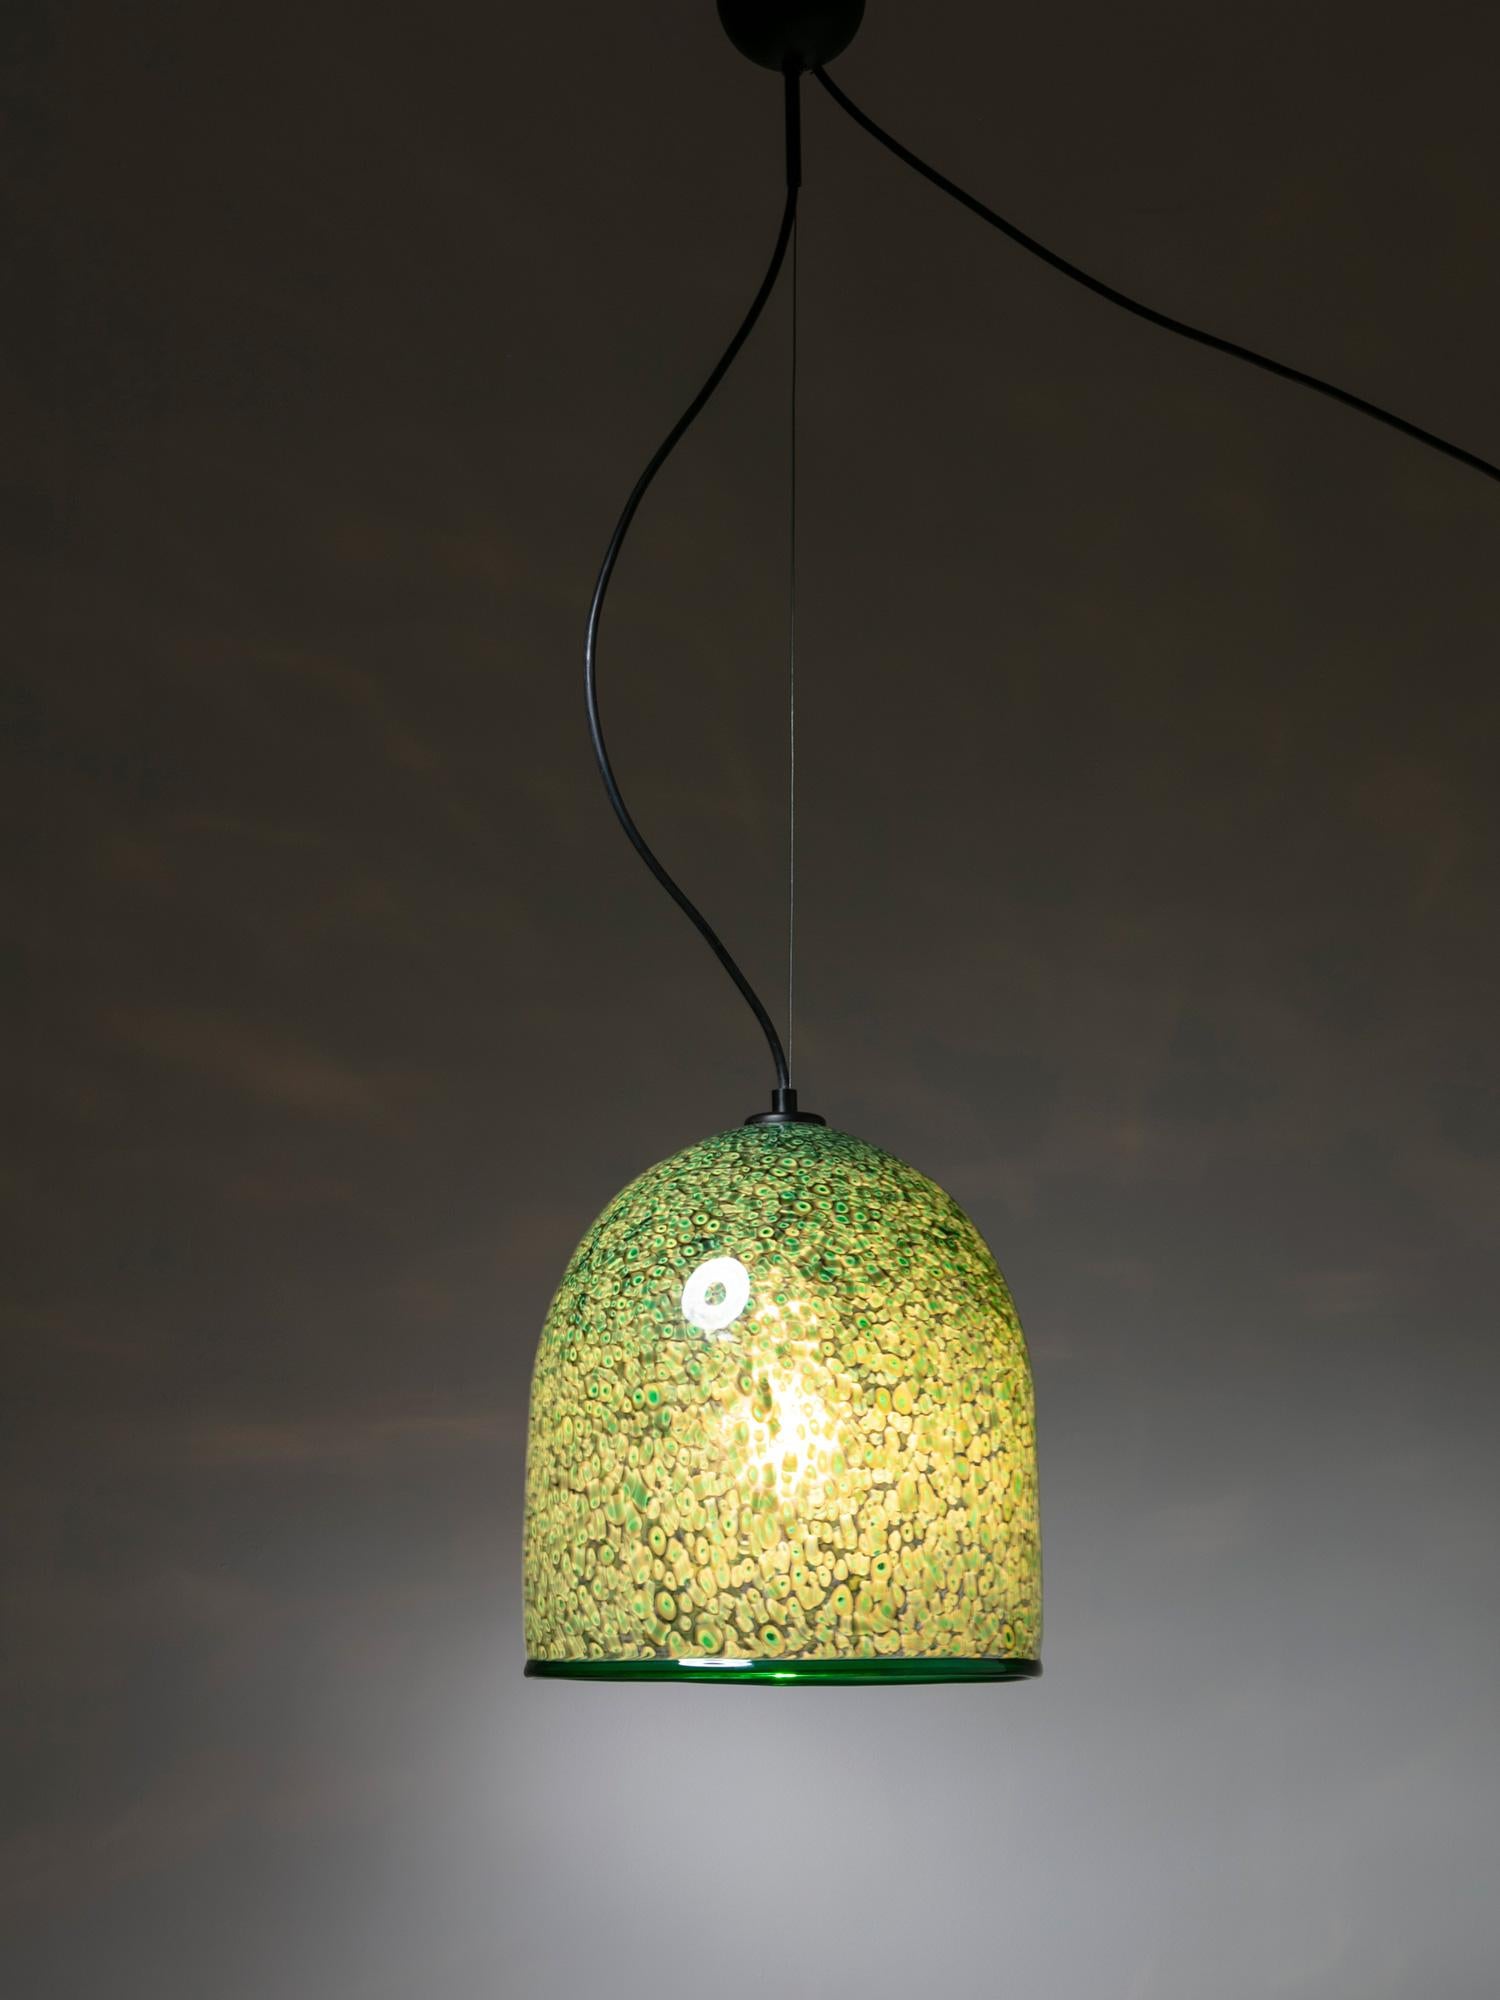 Pair of Neverrino ceiling lamps by Luciano Vistosi for Vistosi.
Different sizes and same green tone glass dome revealing the amazing Murrine pattern when switched on.
This design is often attributed to Gae Aulenti.
Size refers to the largest